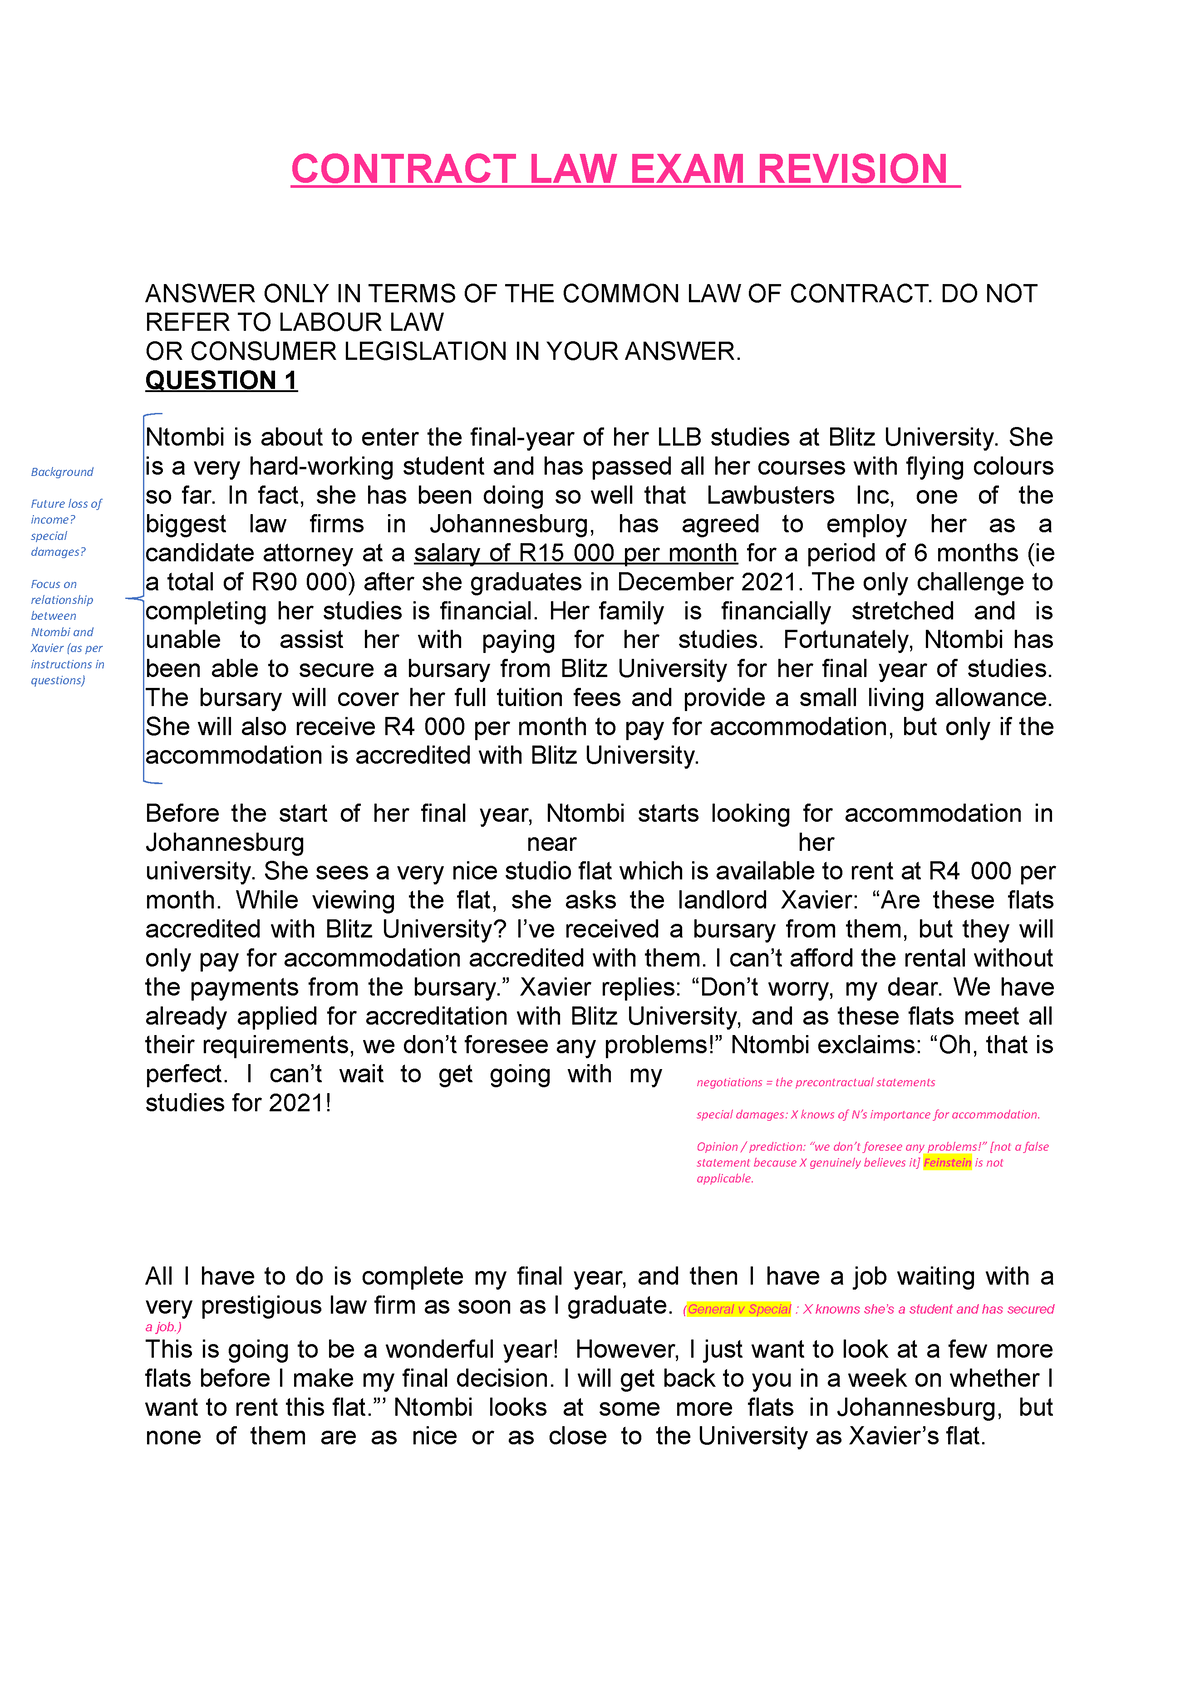 contract law exam essay questions